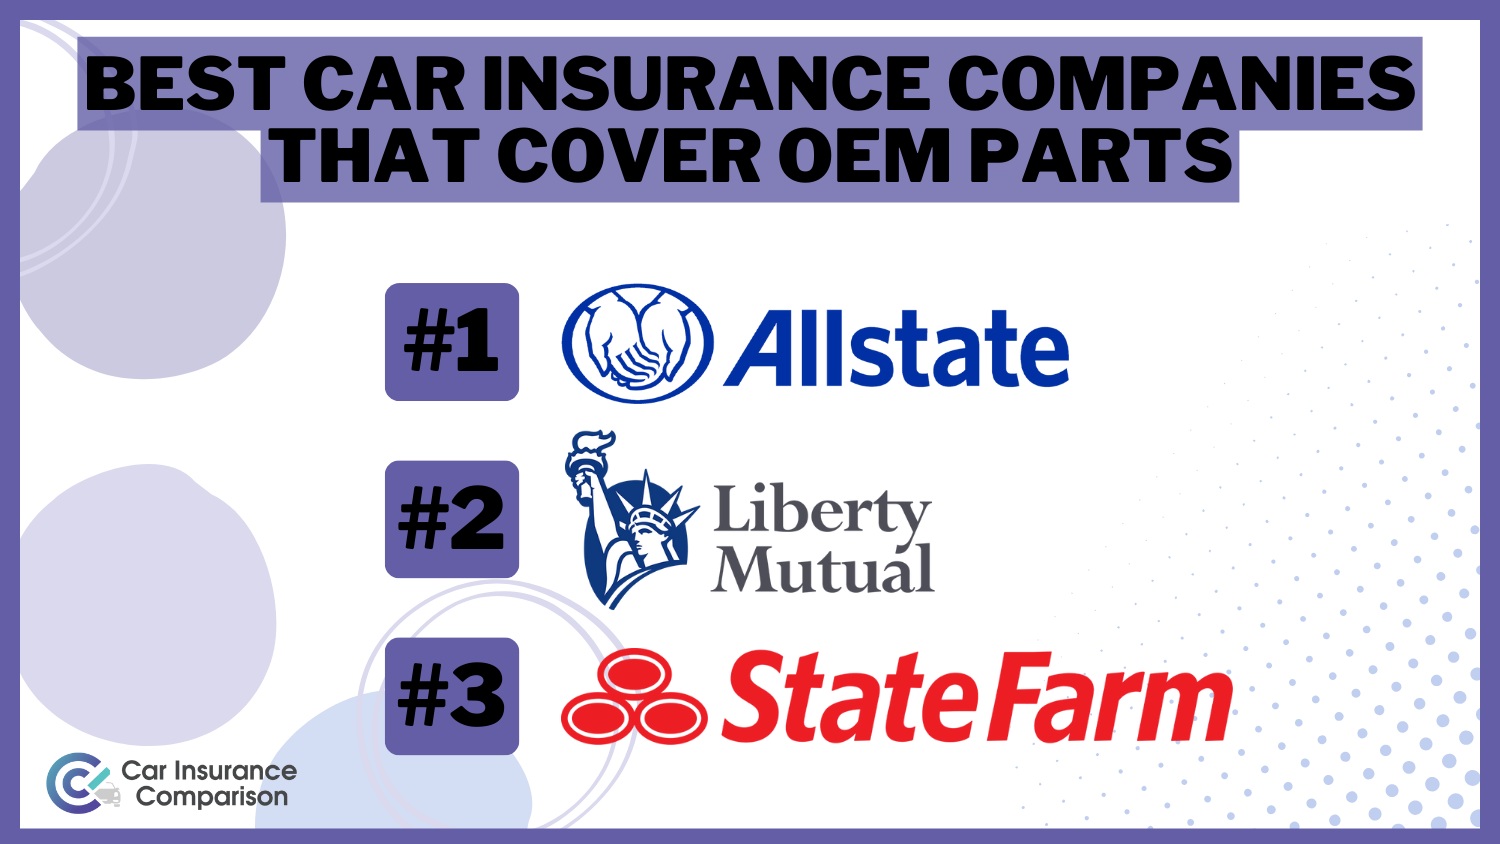 Allstate, Liberty Mutual, and State Farm: Best Car Insurance Companies That Cover OEM Parts